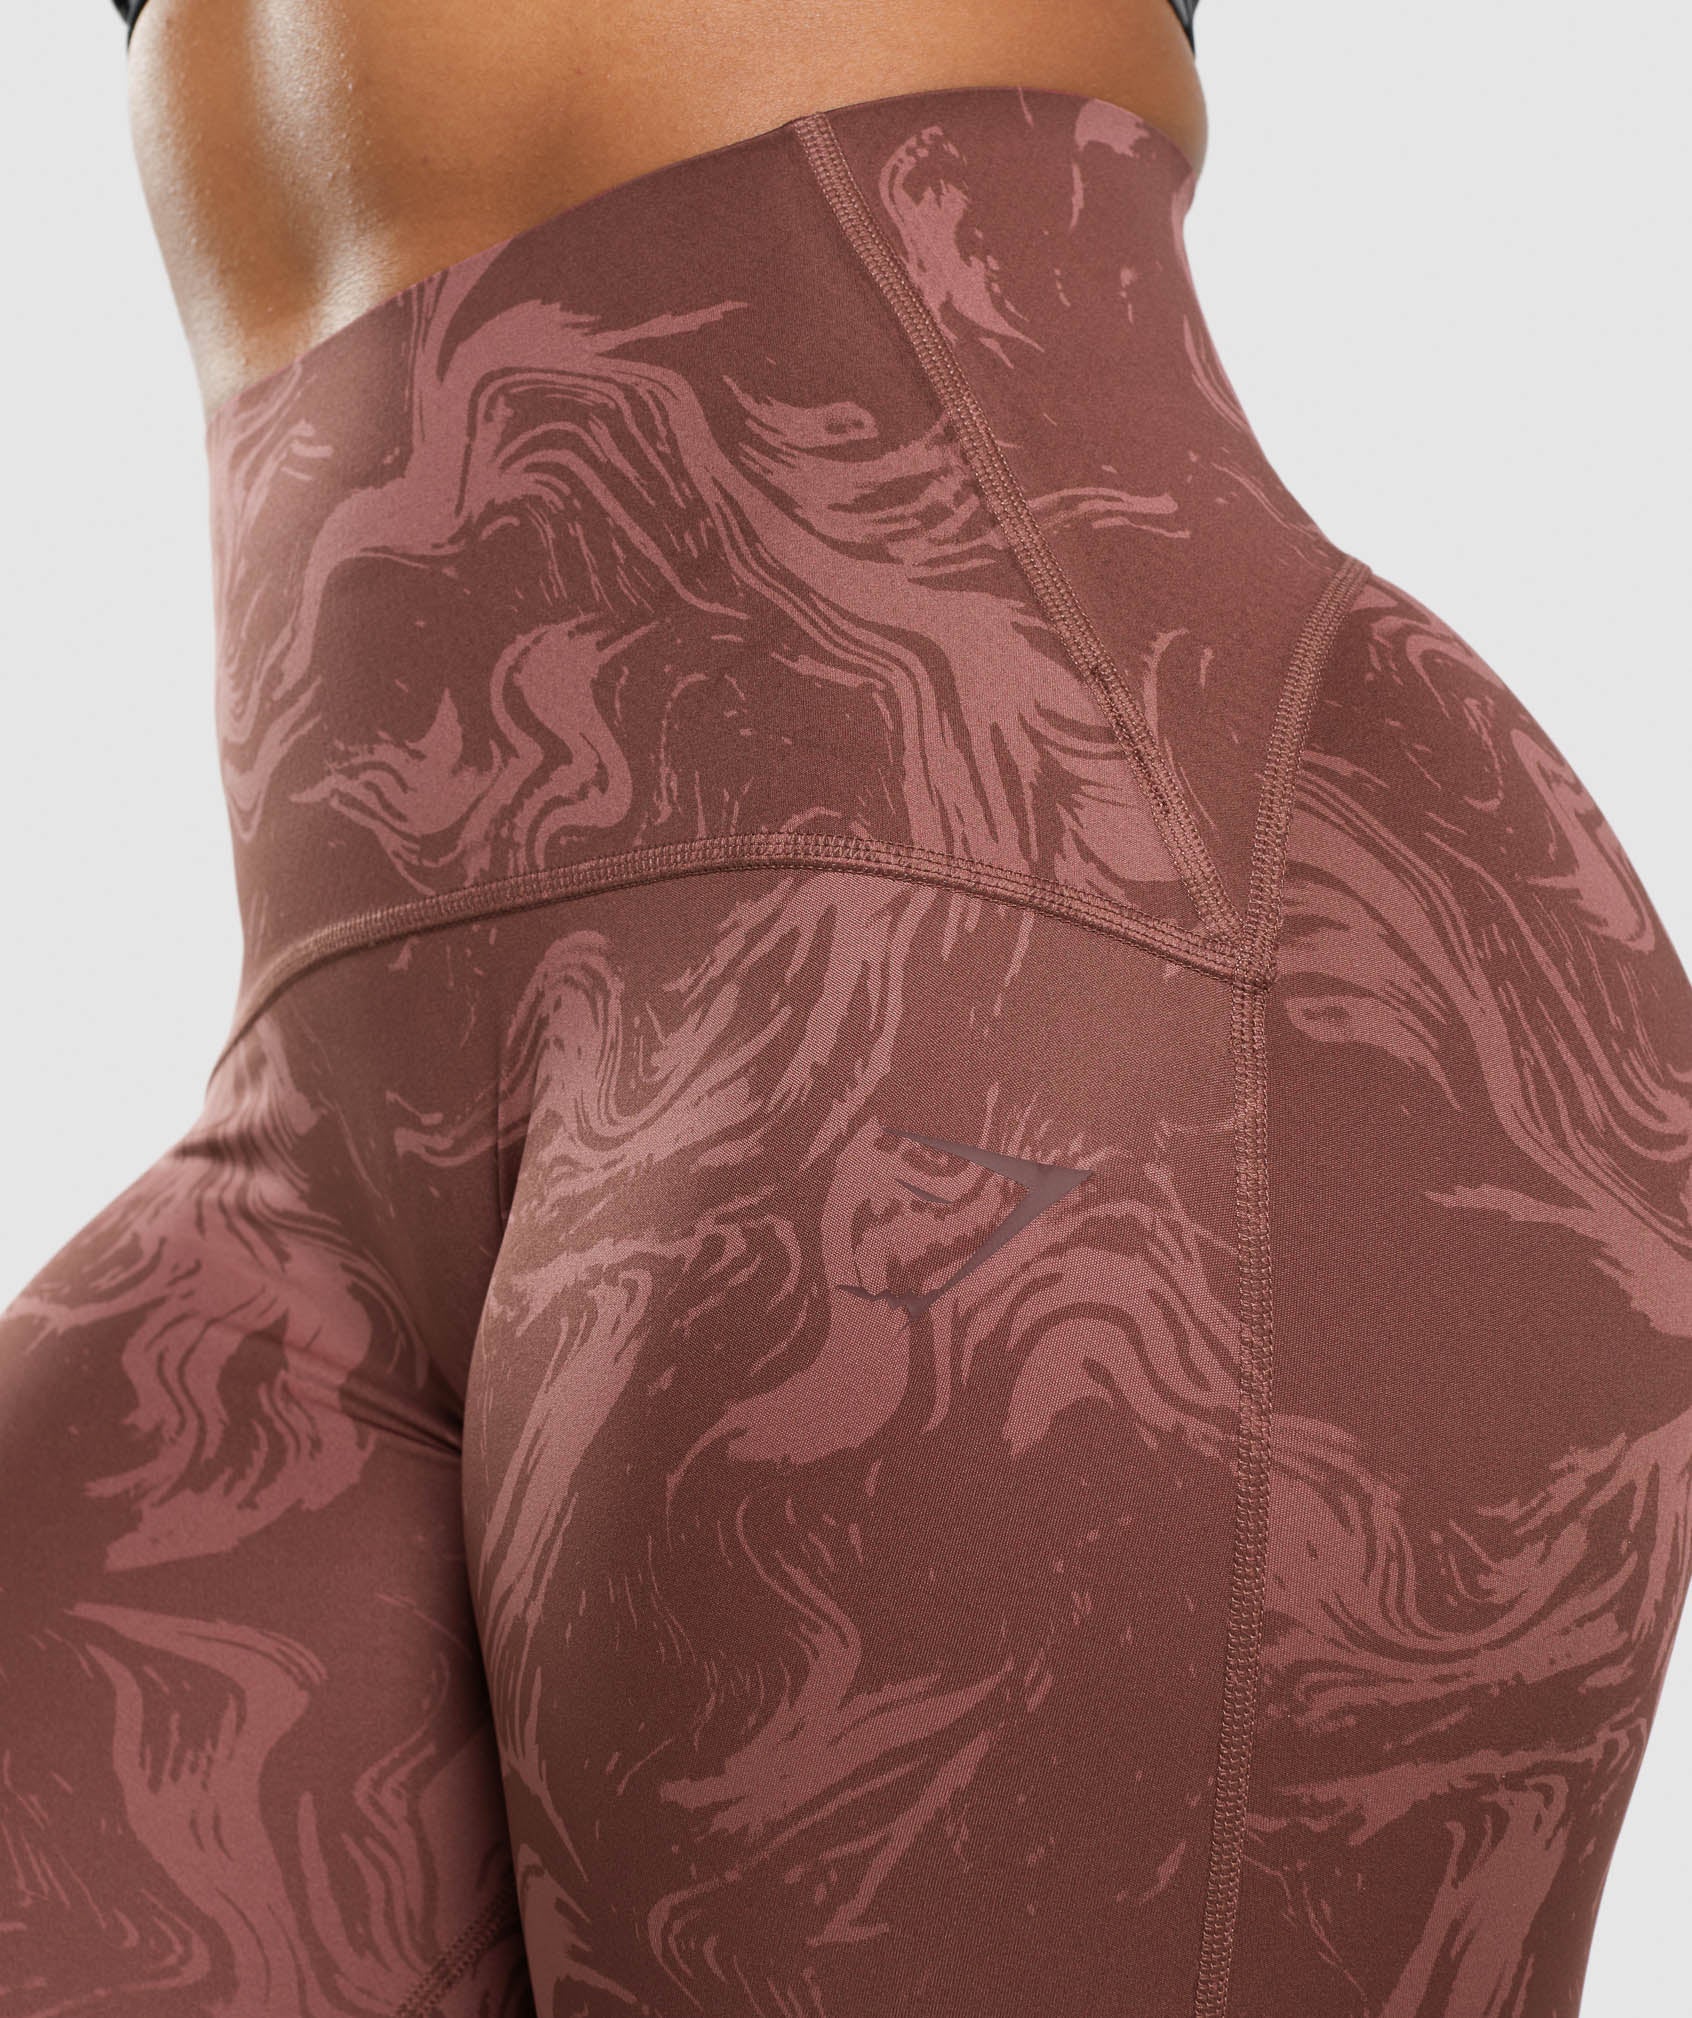 Waist Support Leggings in Cherry Brown Print - view 6